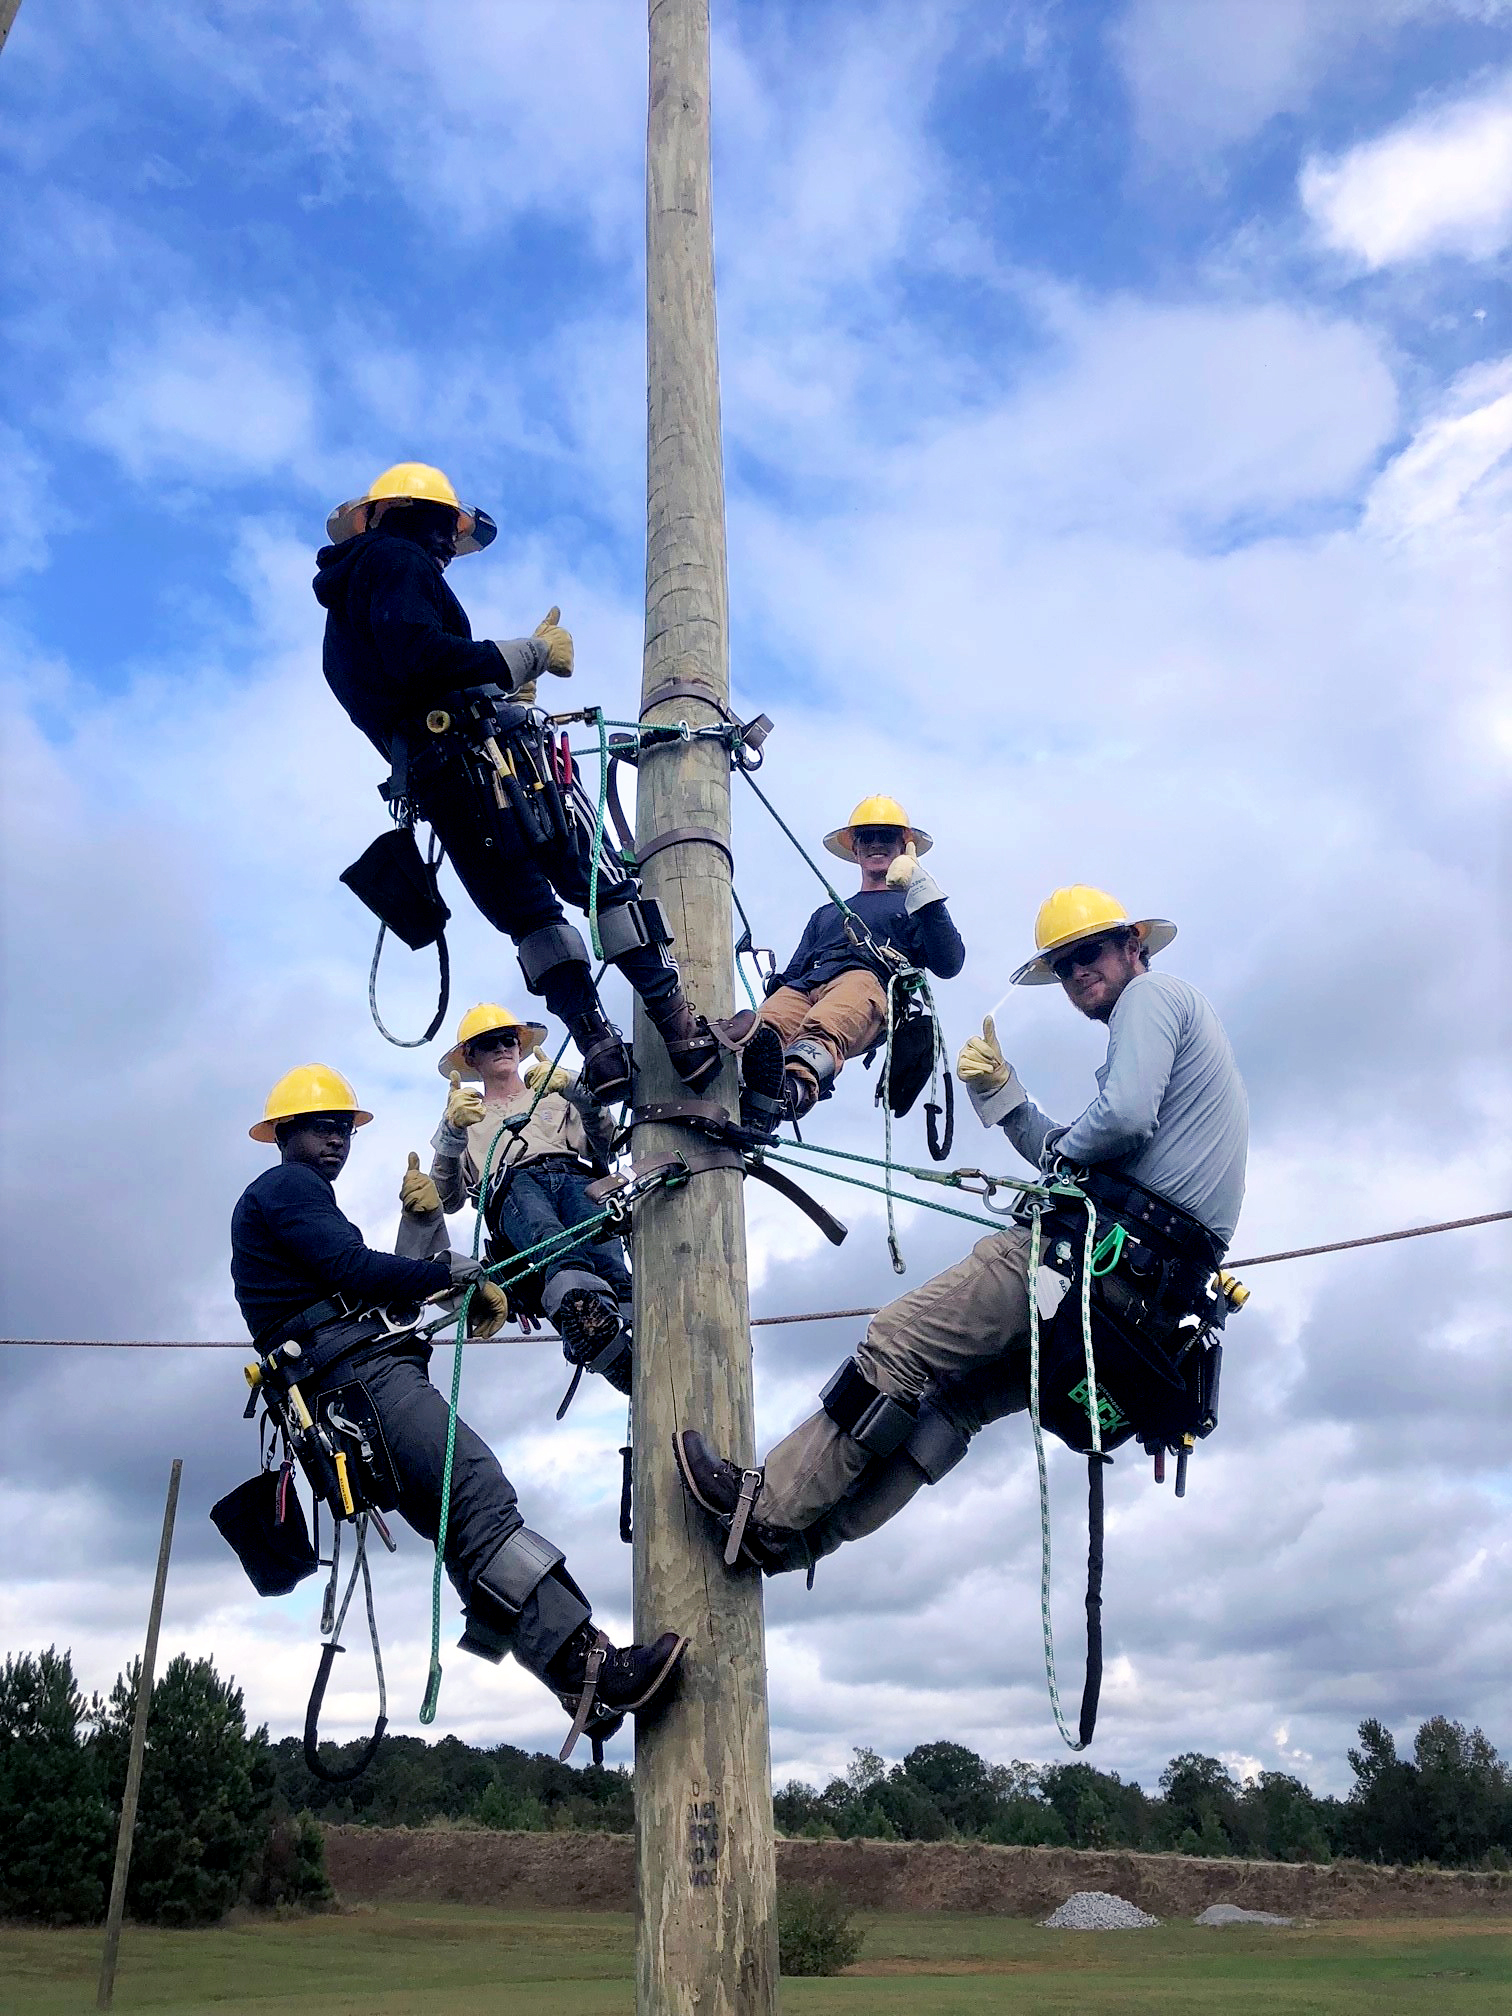 linemen on telephone pole working on power lines